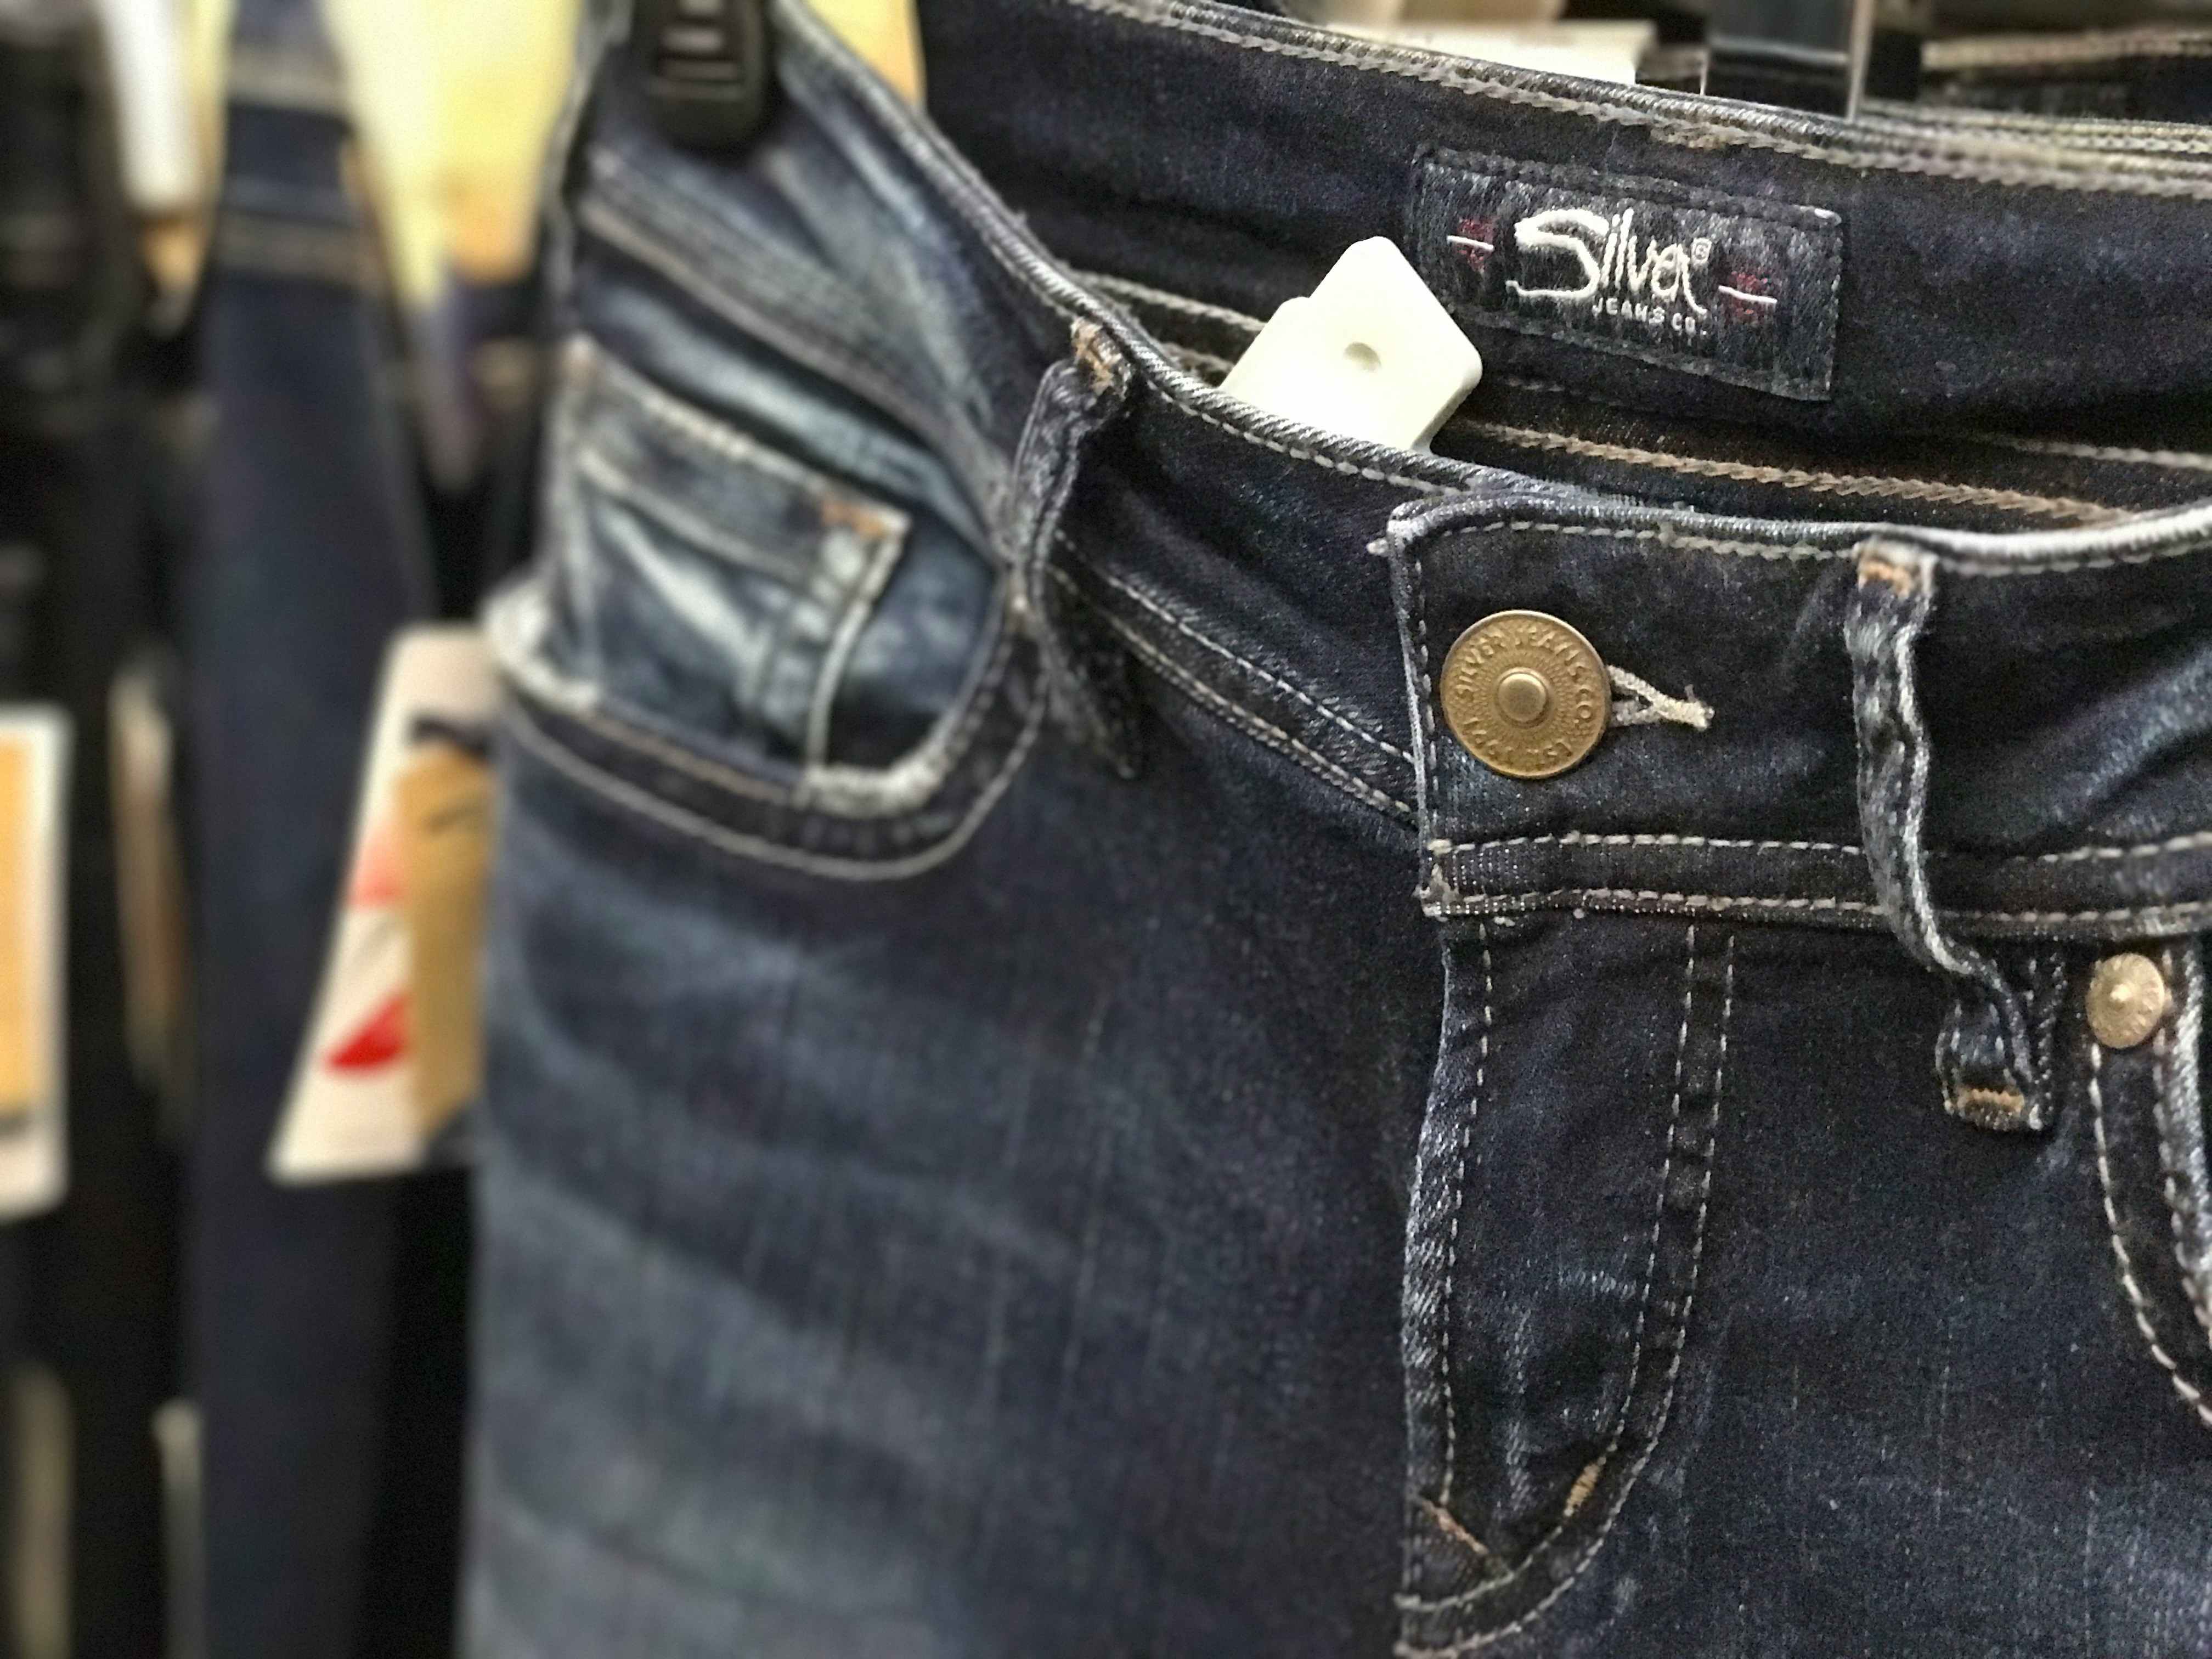 4. Buy Silver jeans on Thursdays or Saturdays from Maurices to save up to 75%.